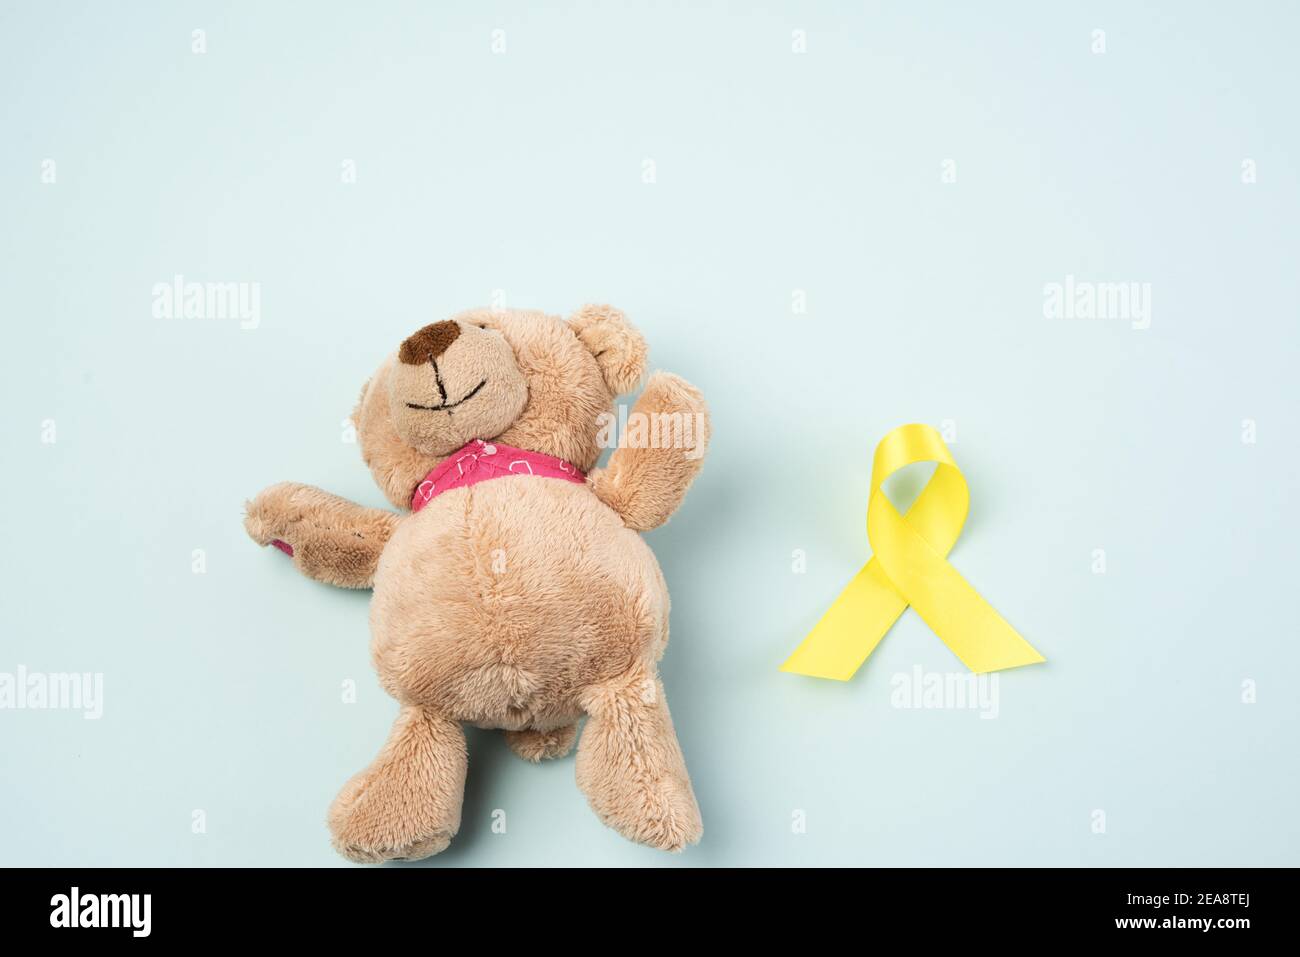 brown teddy bear holds in his paw a yellow ribbon folded in a loop on a blue background. concept of the fight against childhood cancer. problem of sui Stock Photo